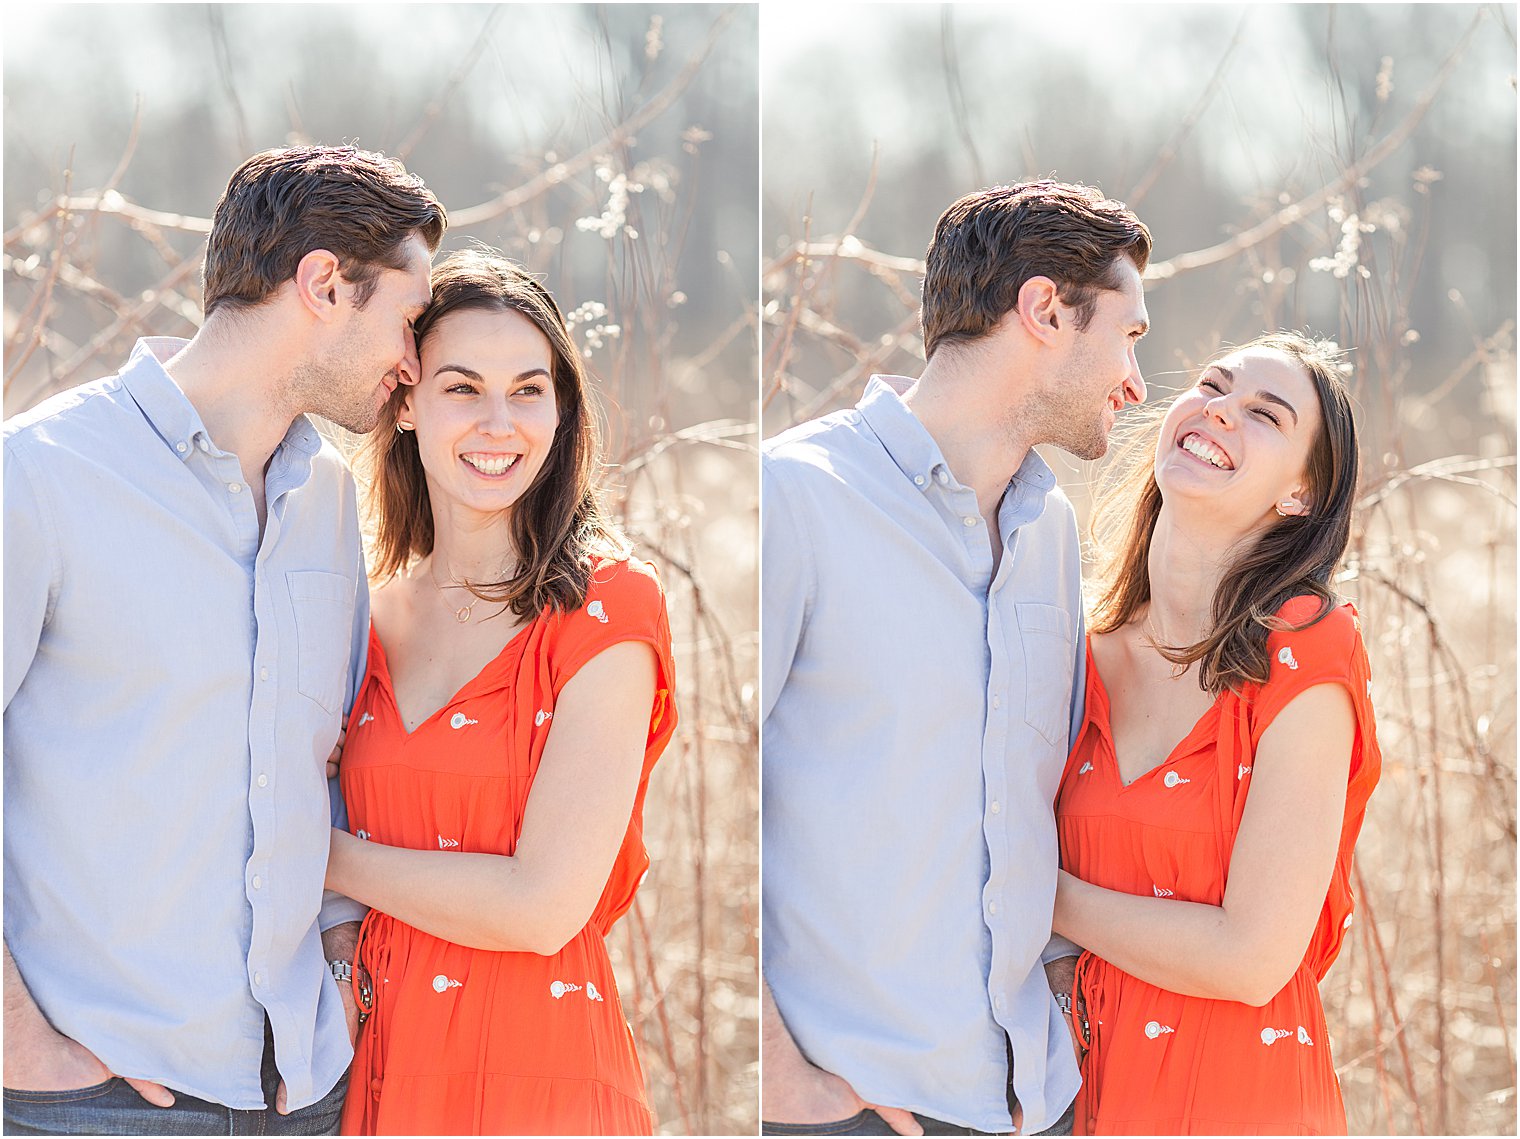 Michael leaning into Erica as she smiles off in the distance and then laughs during Longwood Gardens Spring Engagement Session